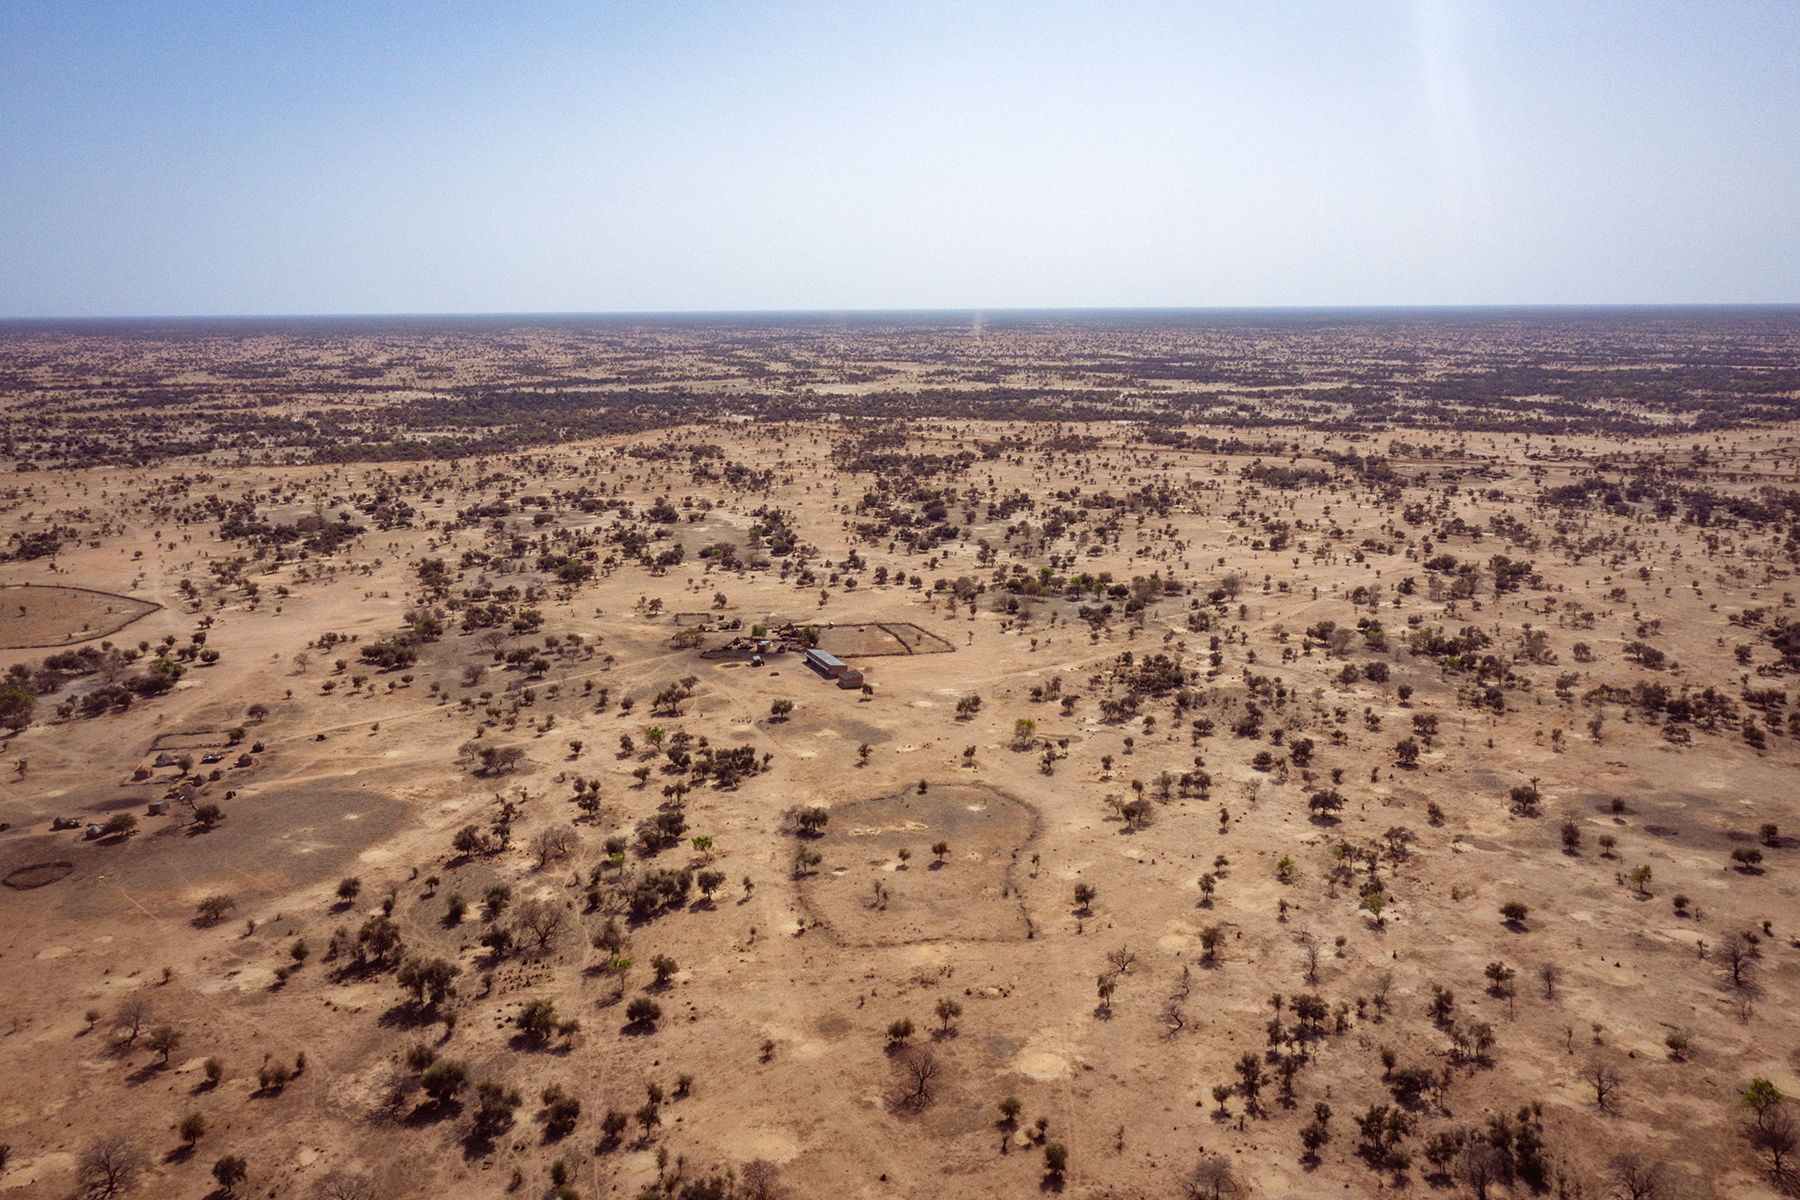 Ferlo, covering an area of nearly 57,269 km² of the Sahel, occupies nearly a third of the country's surface area, extending from the Senegal river valley to the fringes of the groundnut basin. © Aldi Diasse